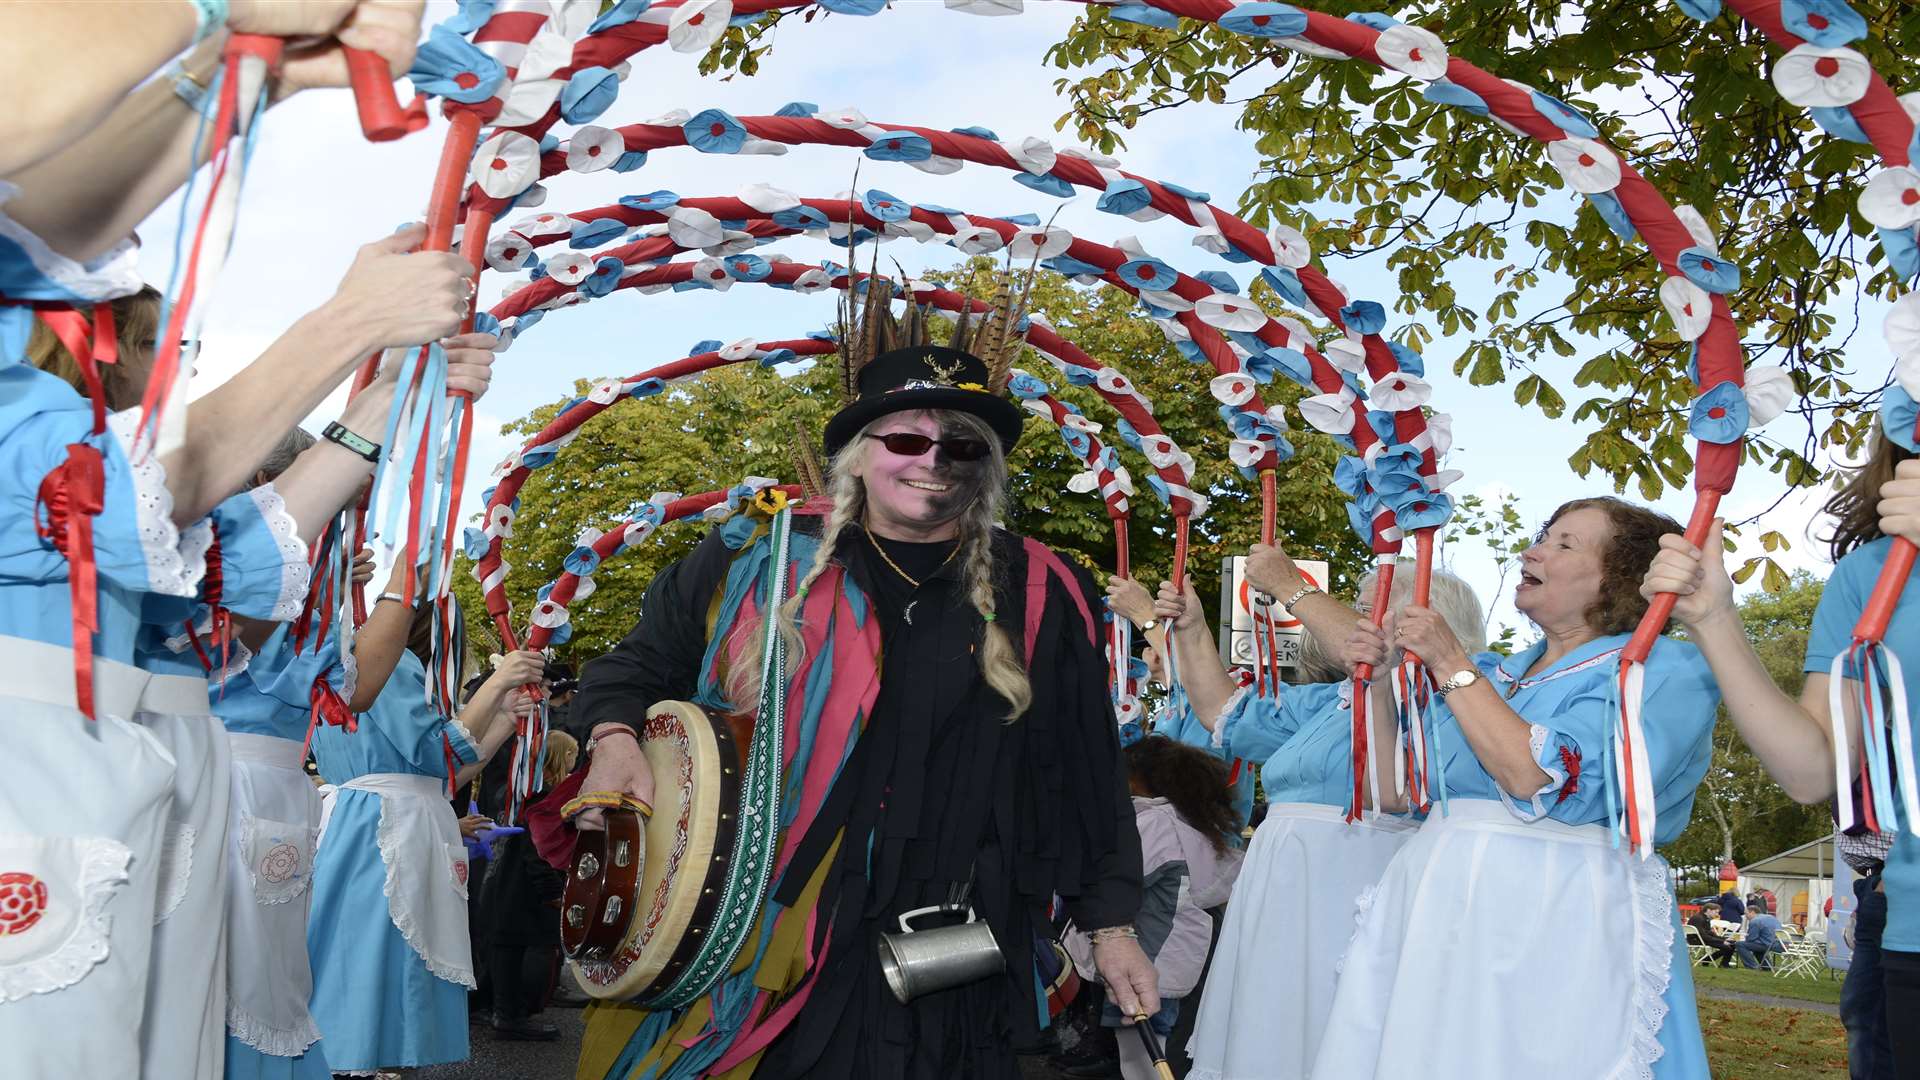 Dancers went through an arch of fellow dancers at Tenterden Folk Festival last year Picture: Paul Amos